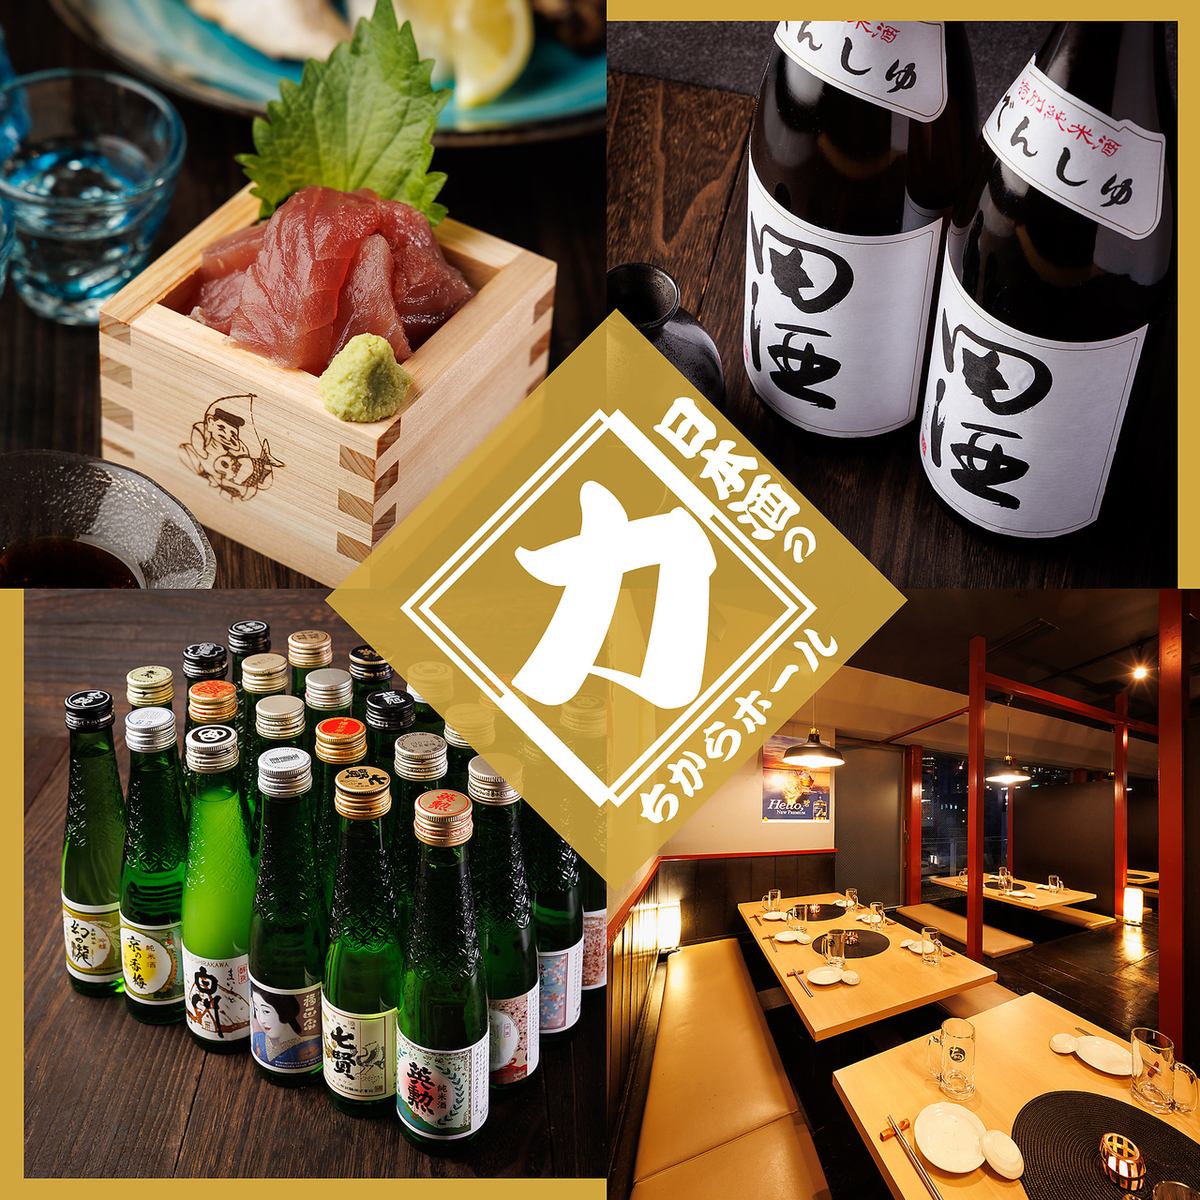 Private room x 3 hours all-you-can-drink x Banquet ◎ All-you-can-drink courses start at 3,000 yen!